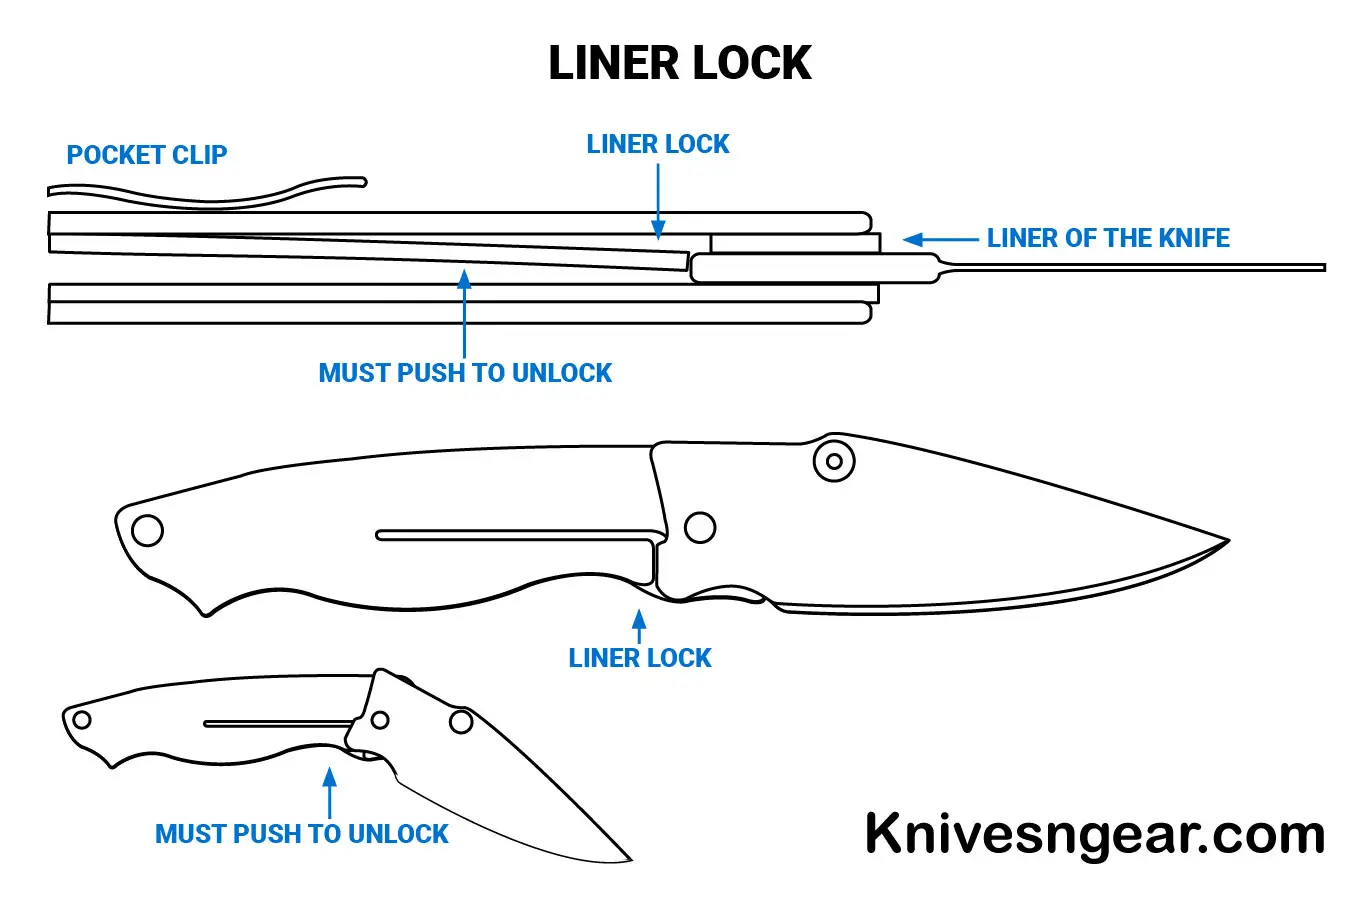 How to Close a Liner Lock Knife